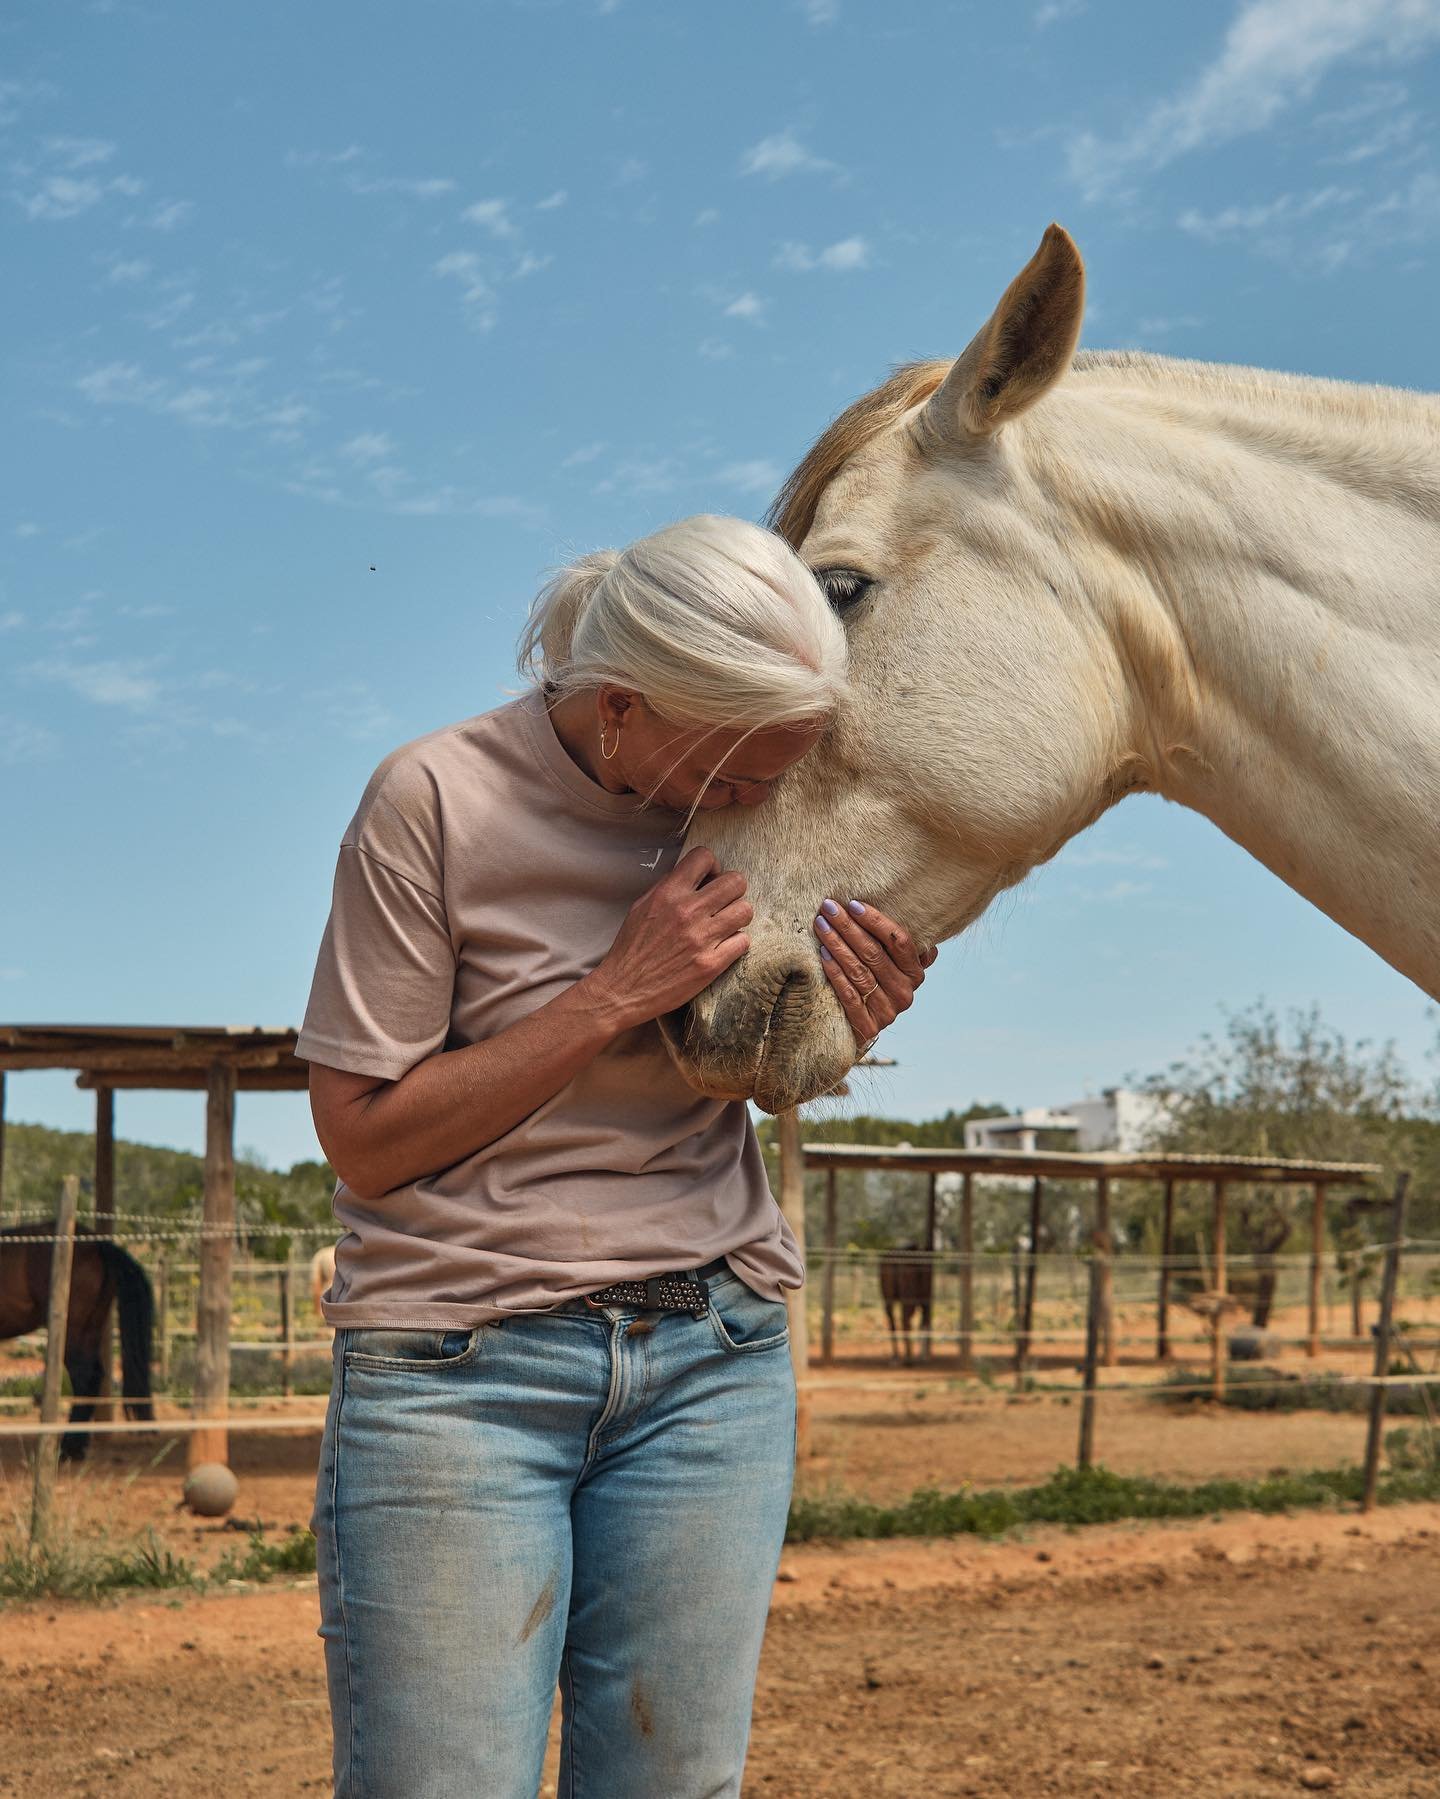 &ldquo;If you want to get close to the horse, you have to get close to yourself.&rdquo; 

In horse coaching, the goal isn&rsquo;t just bonding with the horse, but understanding what this relationship reveals about you.

Let me give you an example:

D